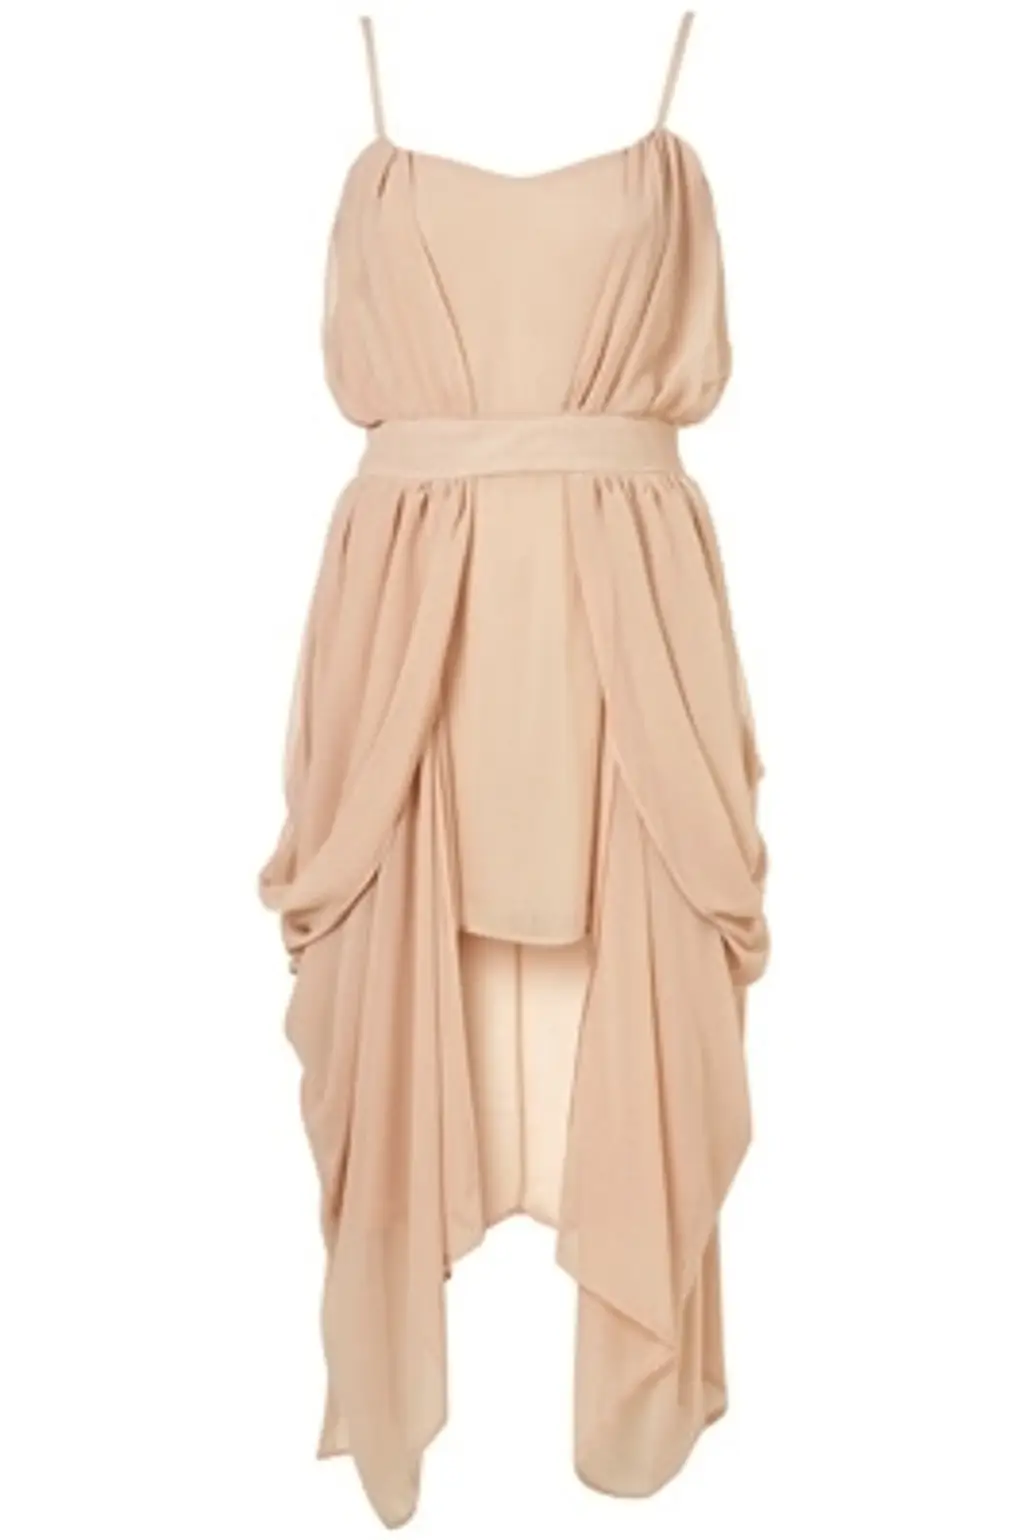 Topshop Limited Edition Draped Side Dress